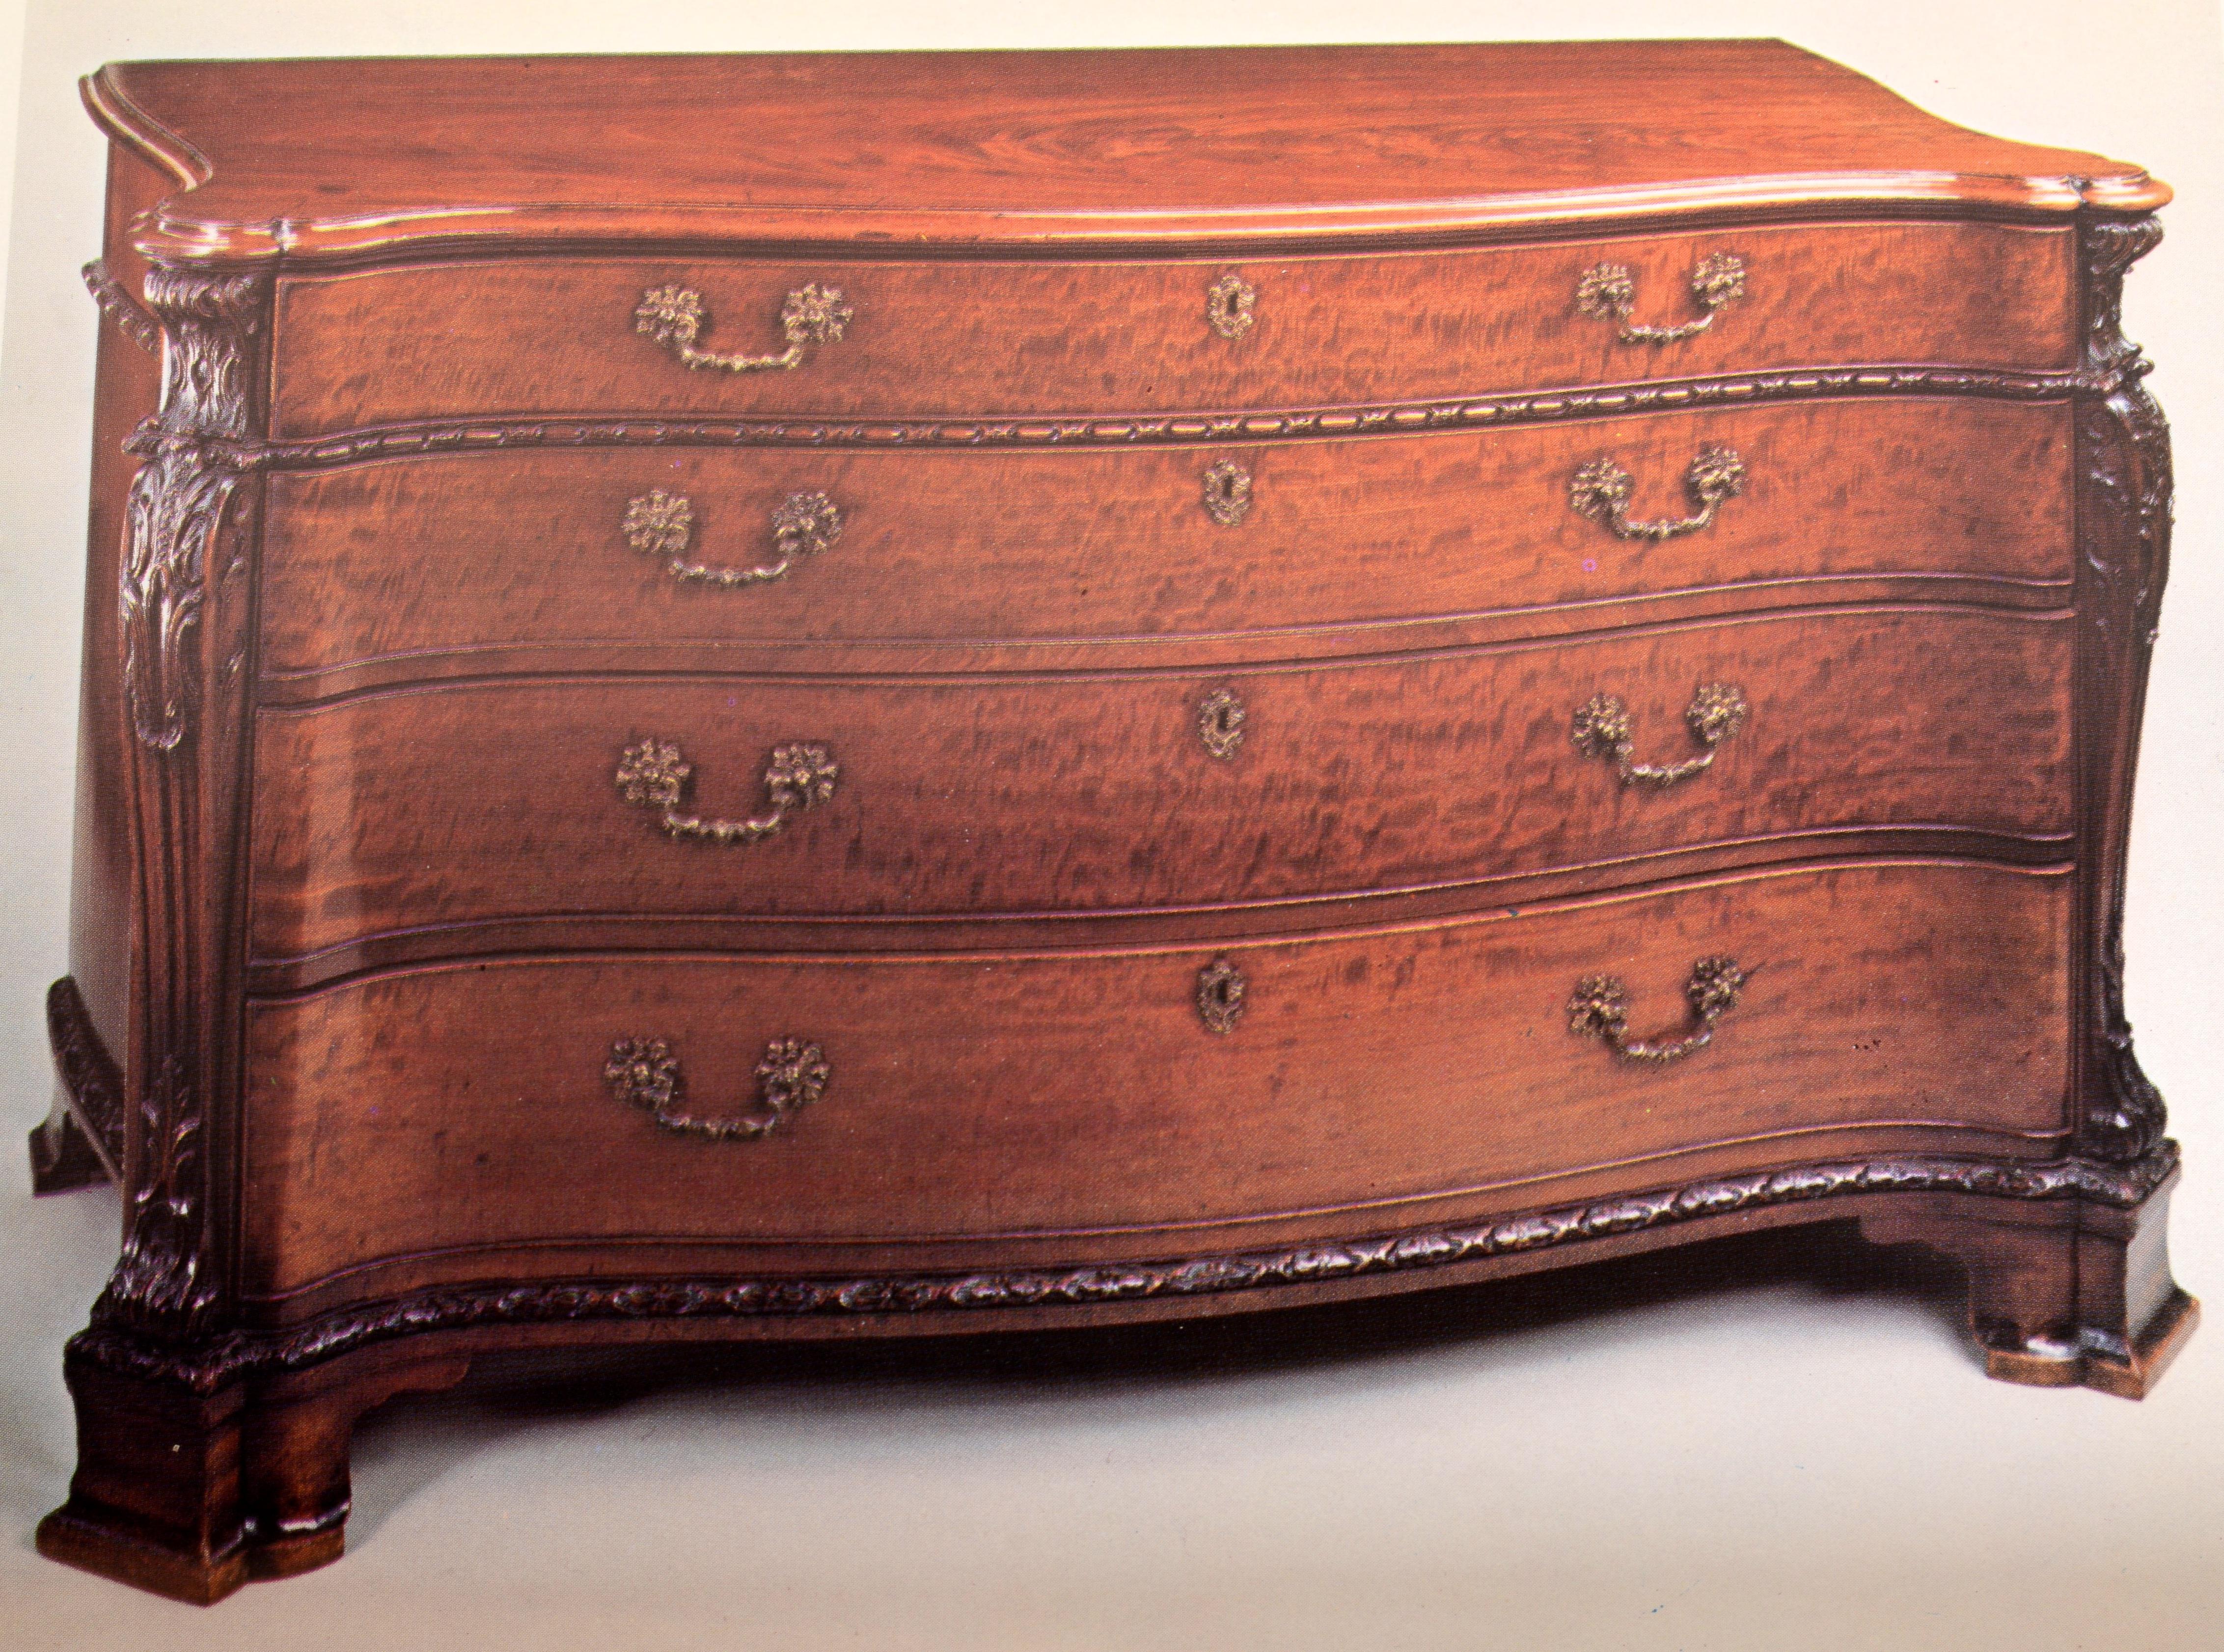 Christie's Part I & II, Childwick Bury, Objects, Fine French & English Furniture For Sale 11